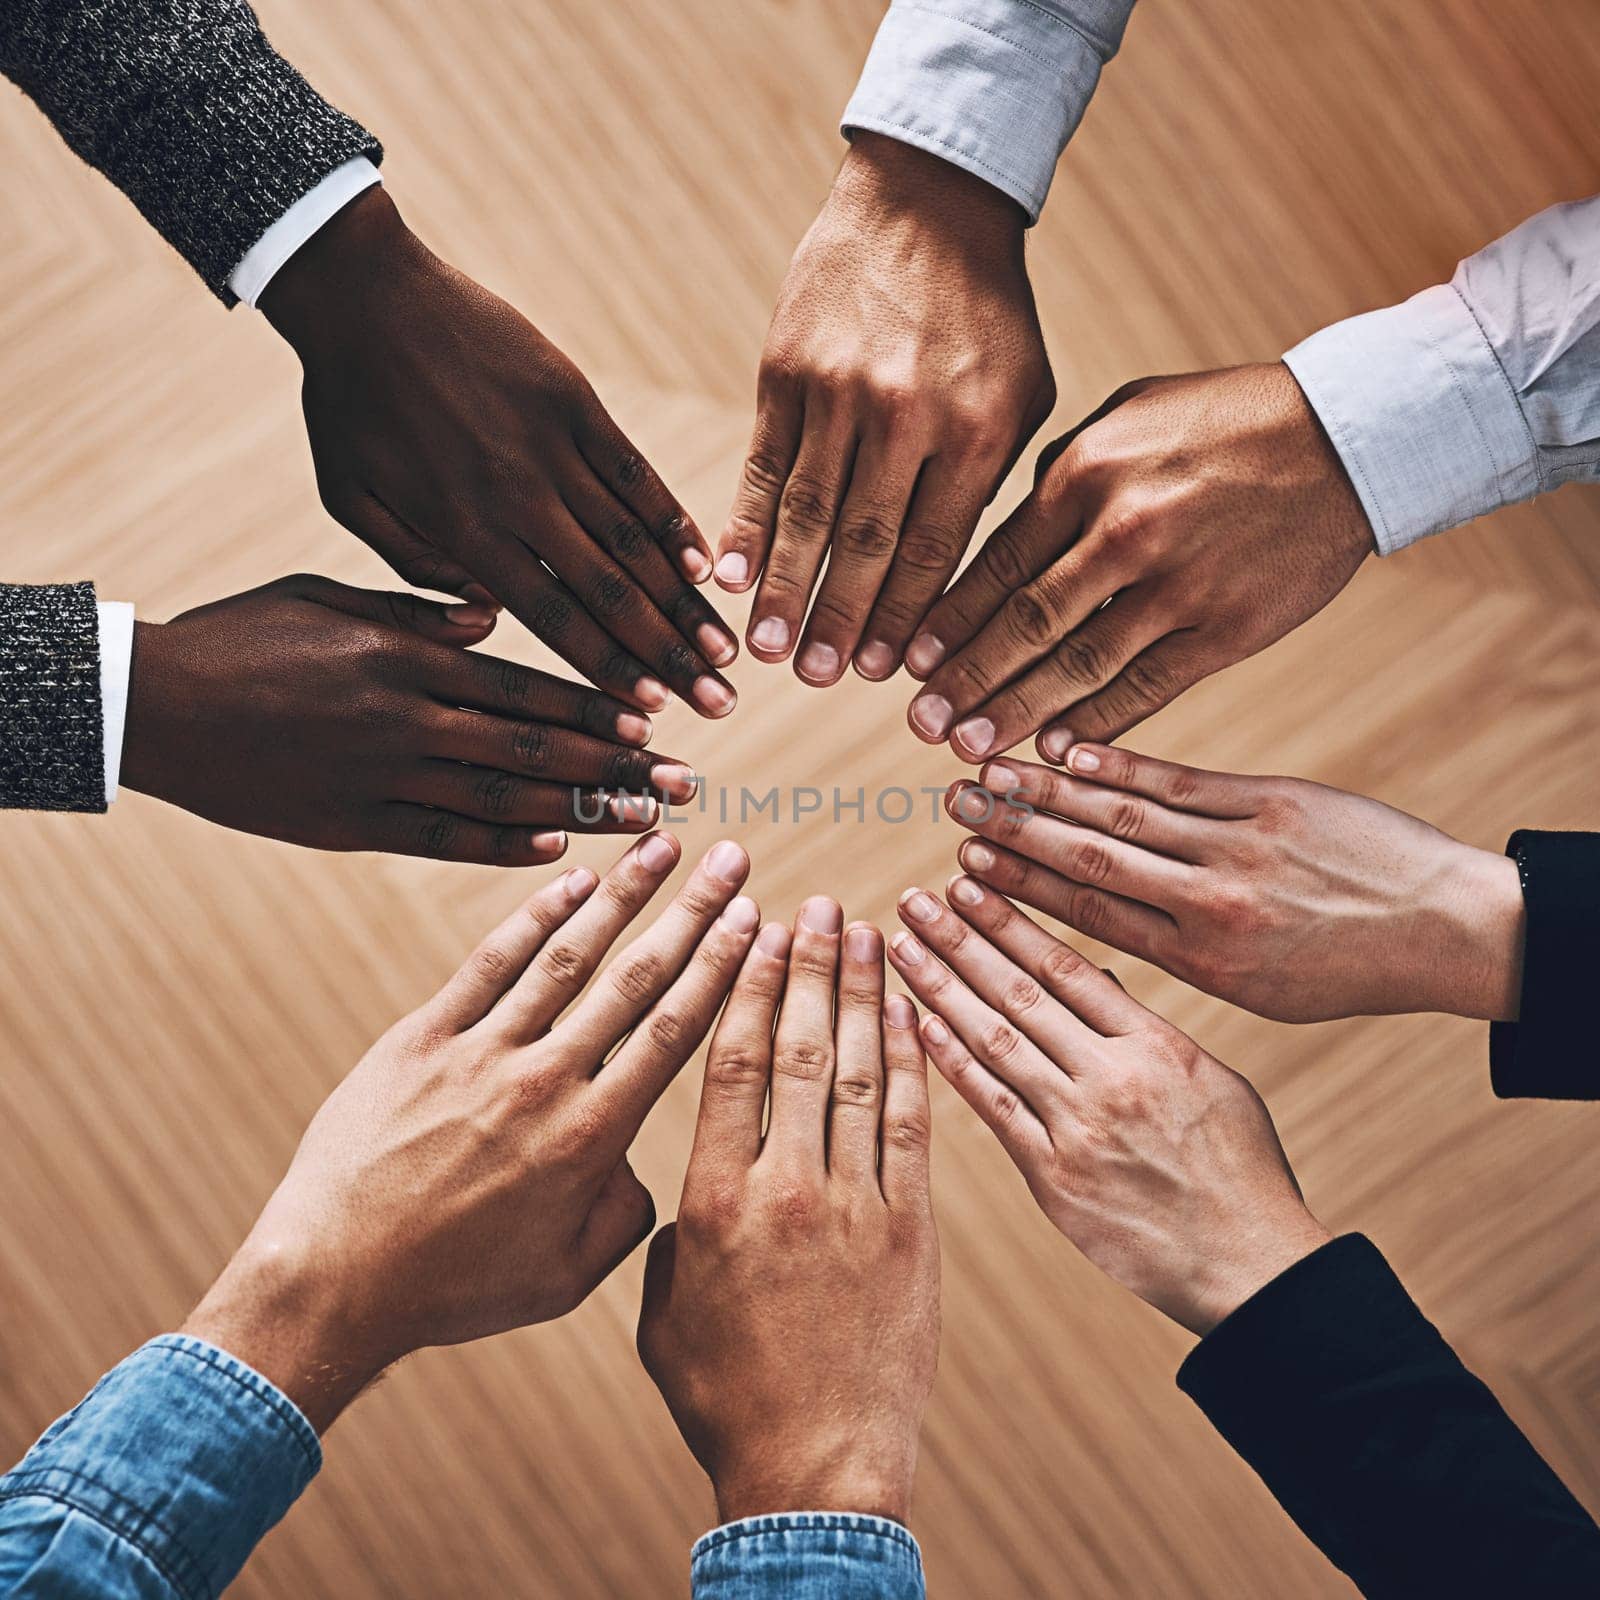 Above, community or hands of business people for support, teamwork or group collaboration in office. Zoom, diversity or employees with diversity, inclusion or mission for partnership goals together.